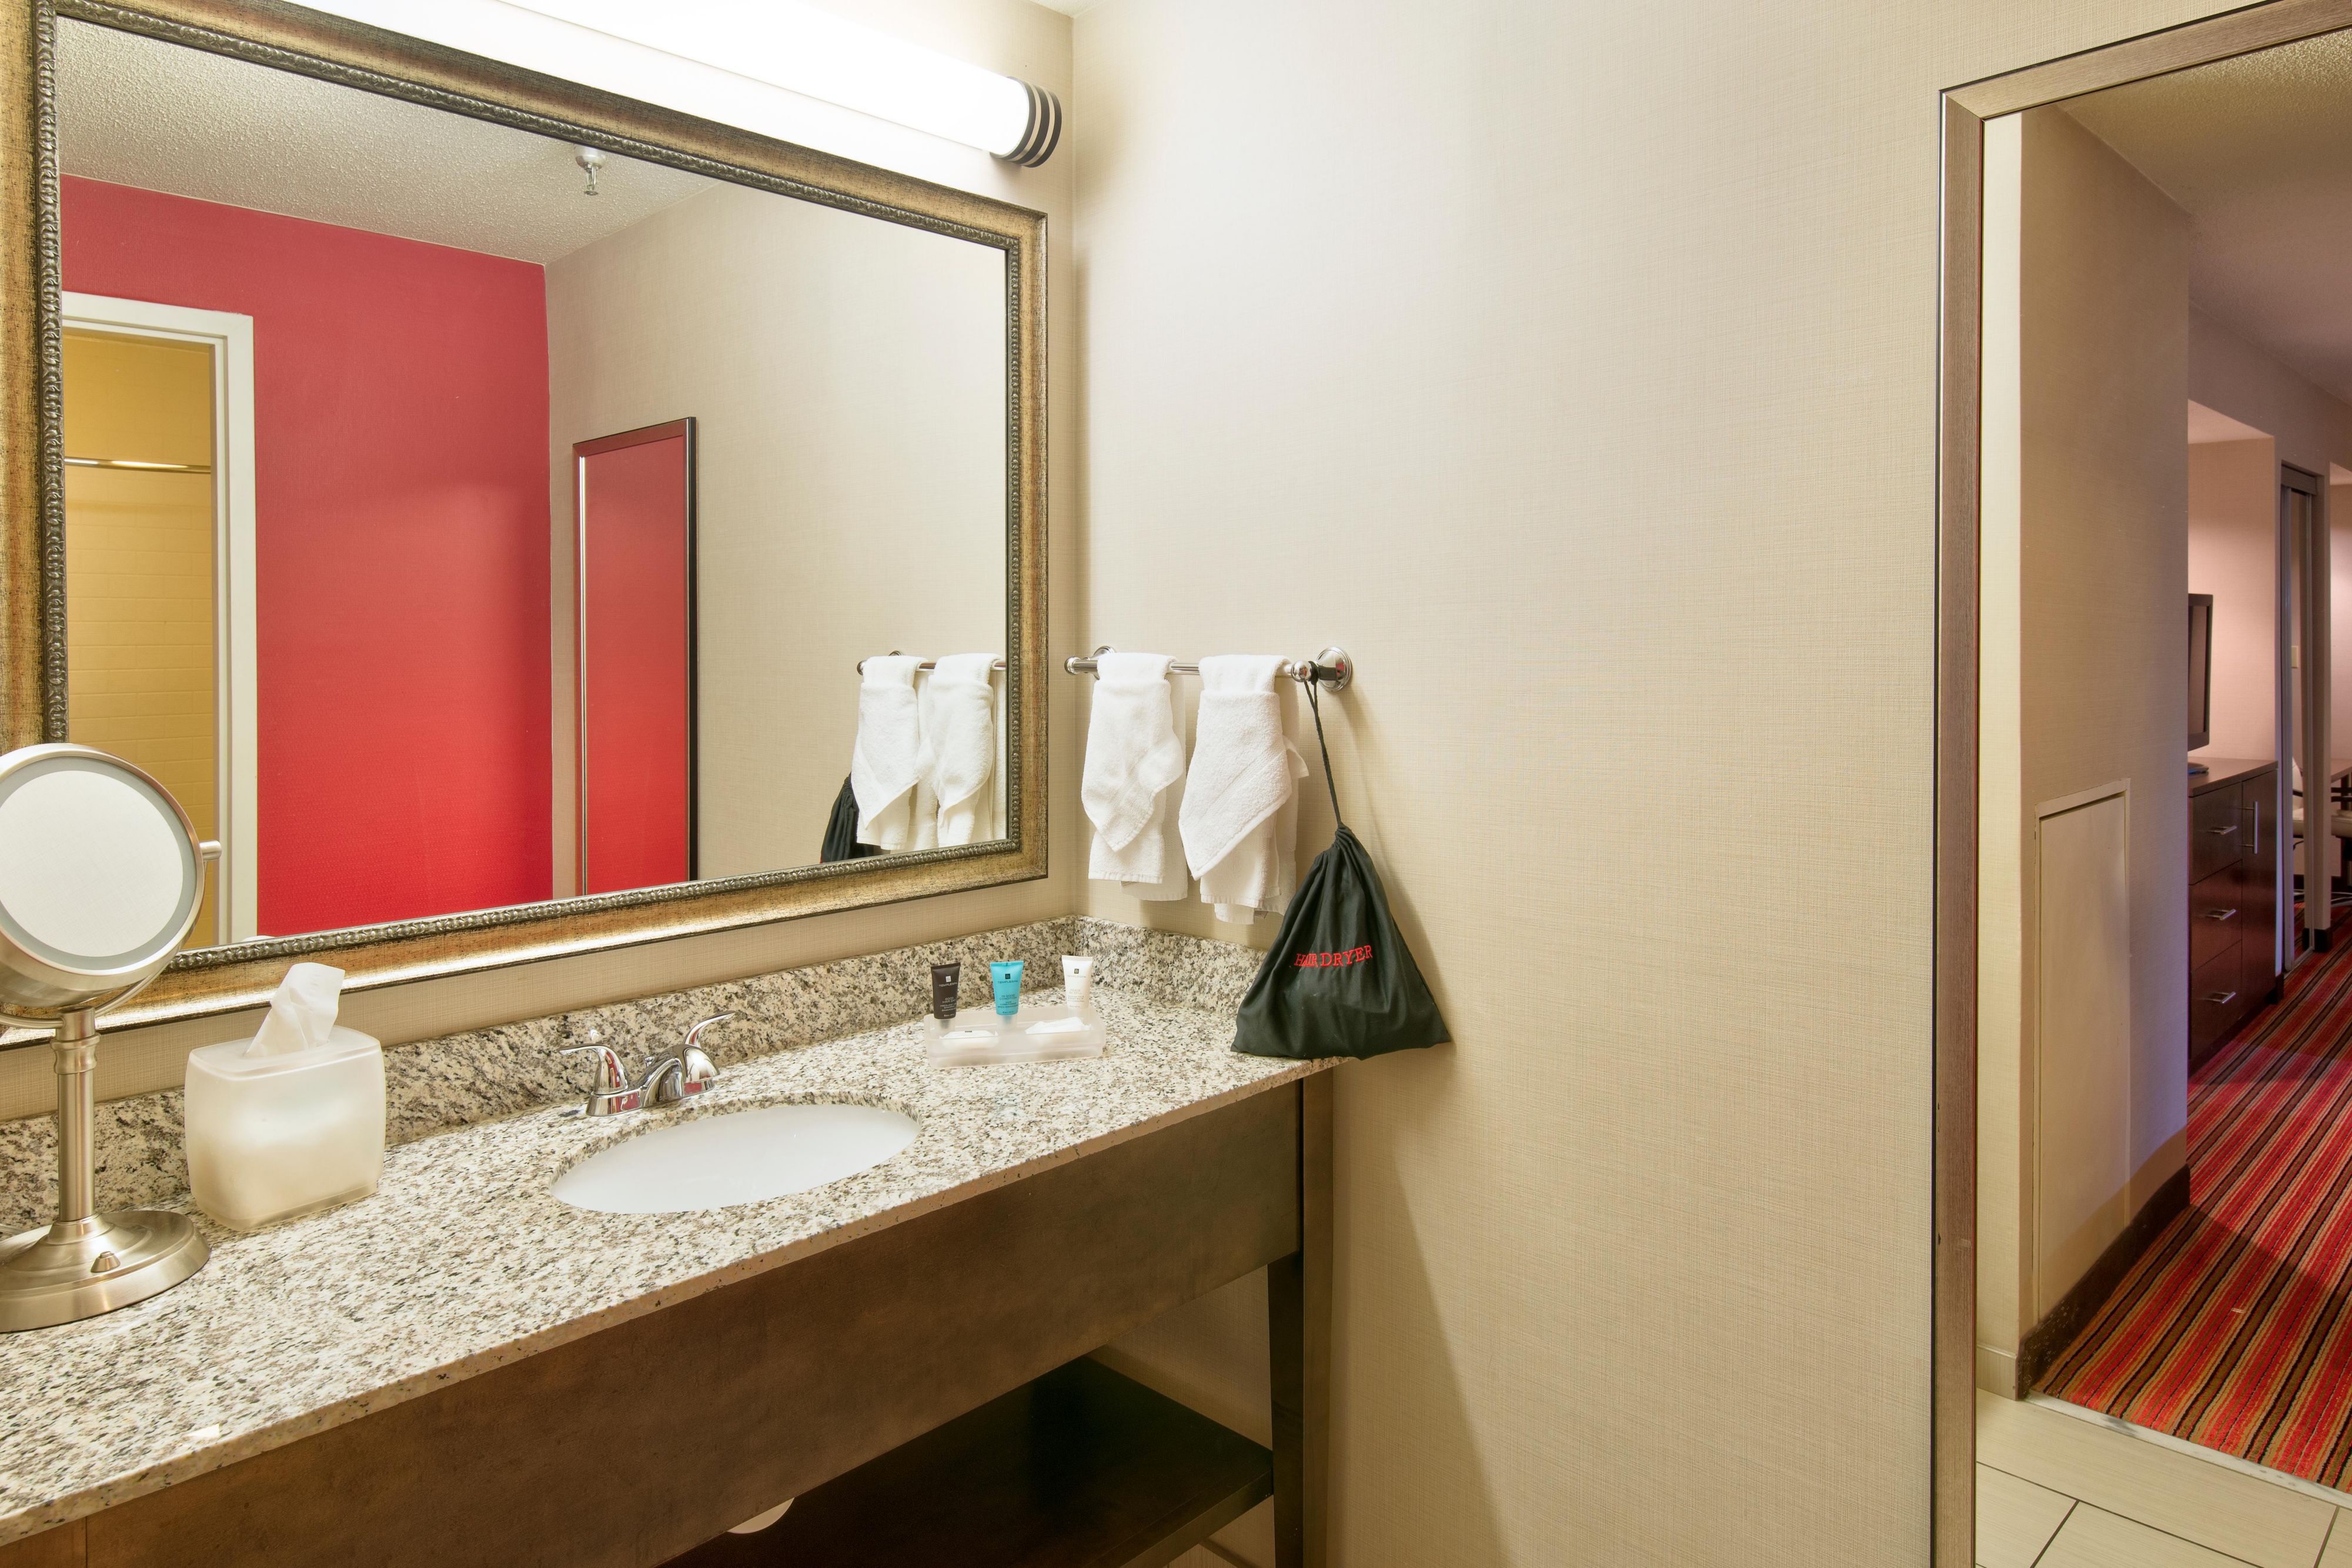 Our guest bathrooms have plenty of counter space to get ready.